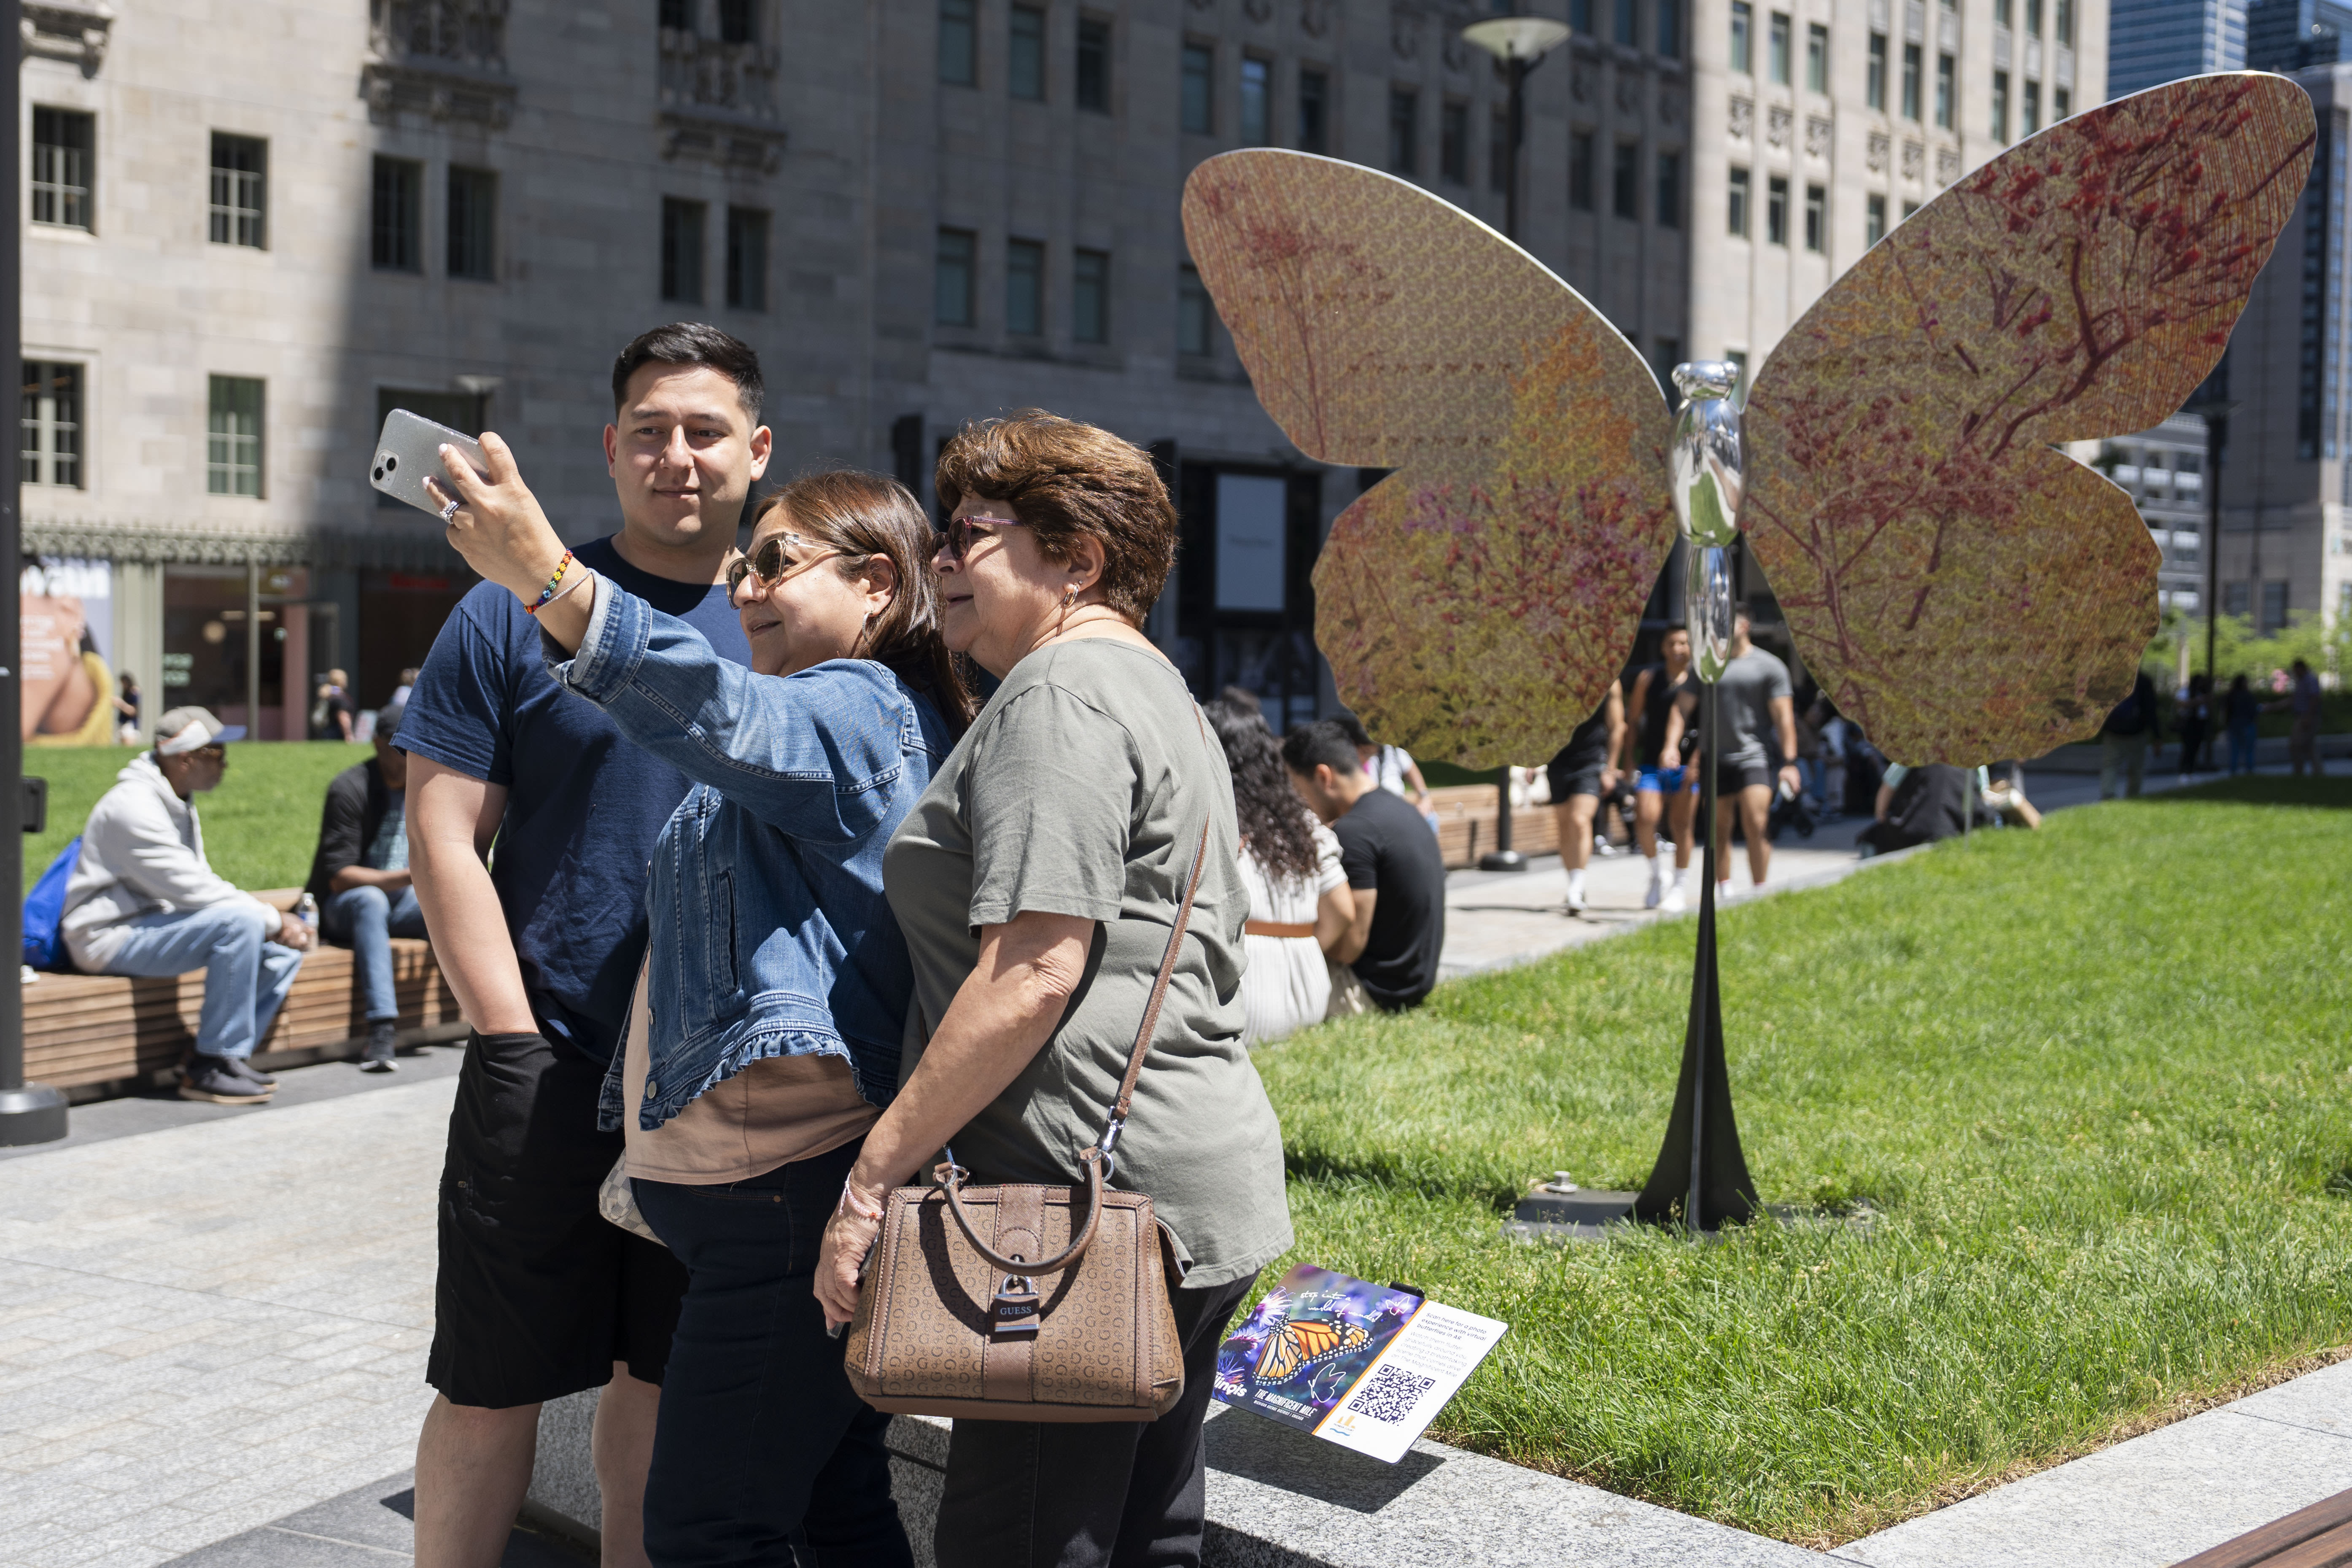 Butterfly sculptures inspire selfies, promote wildlife conservation on the Magnificent Mile